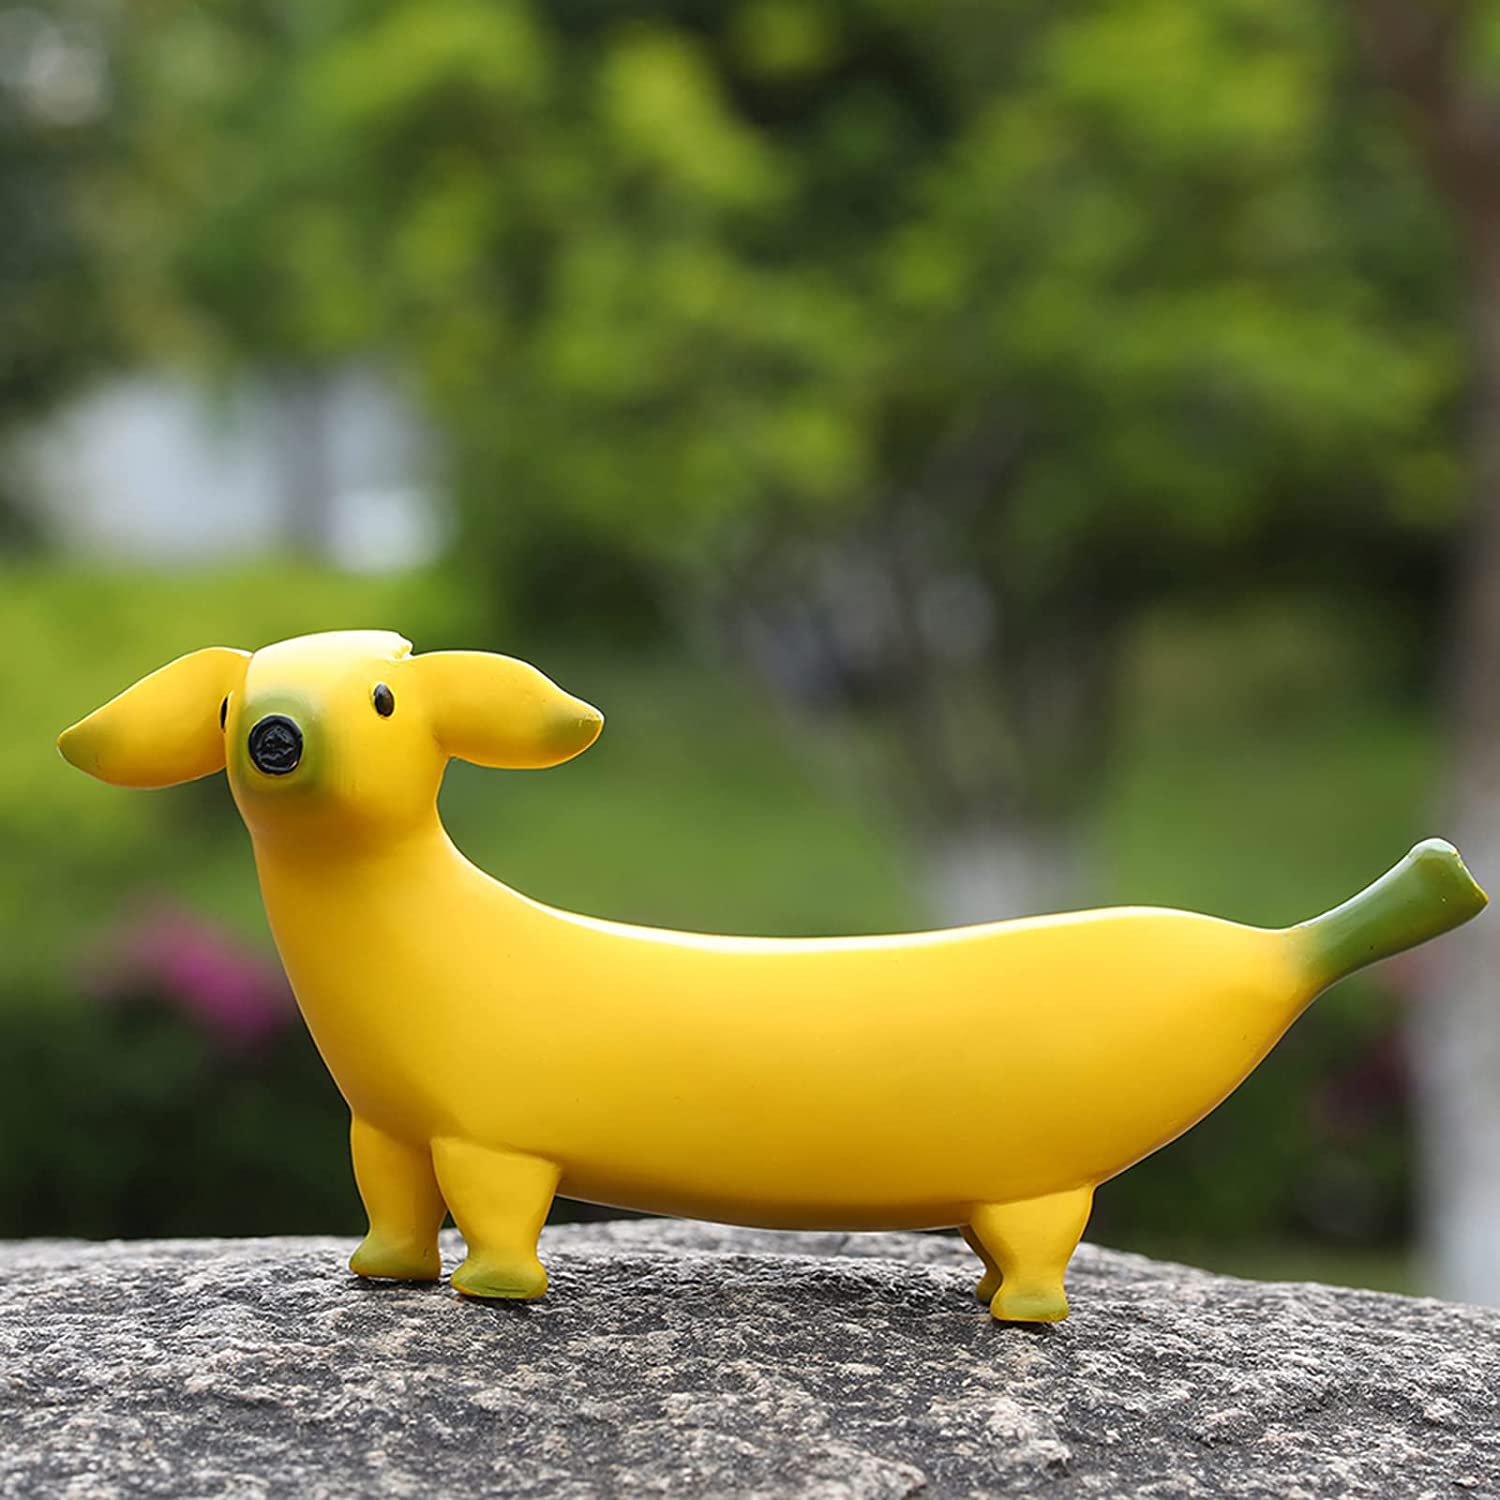 A garden ornament which is called a banana dog as it is shaped like a banana but with a dogs head.